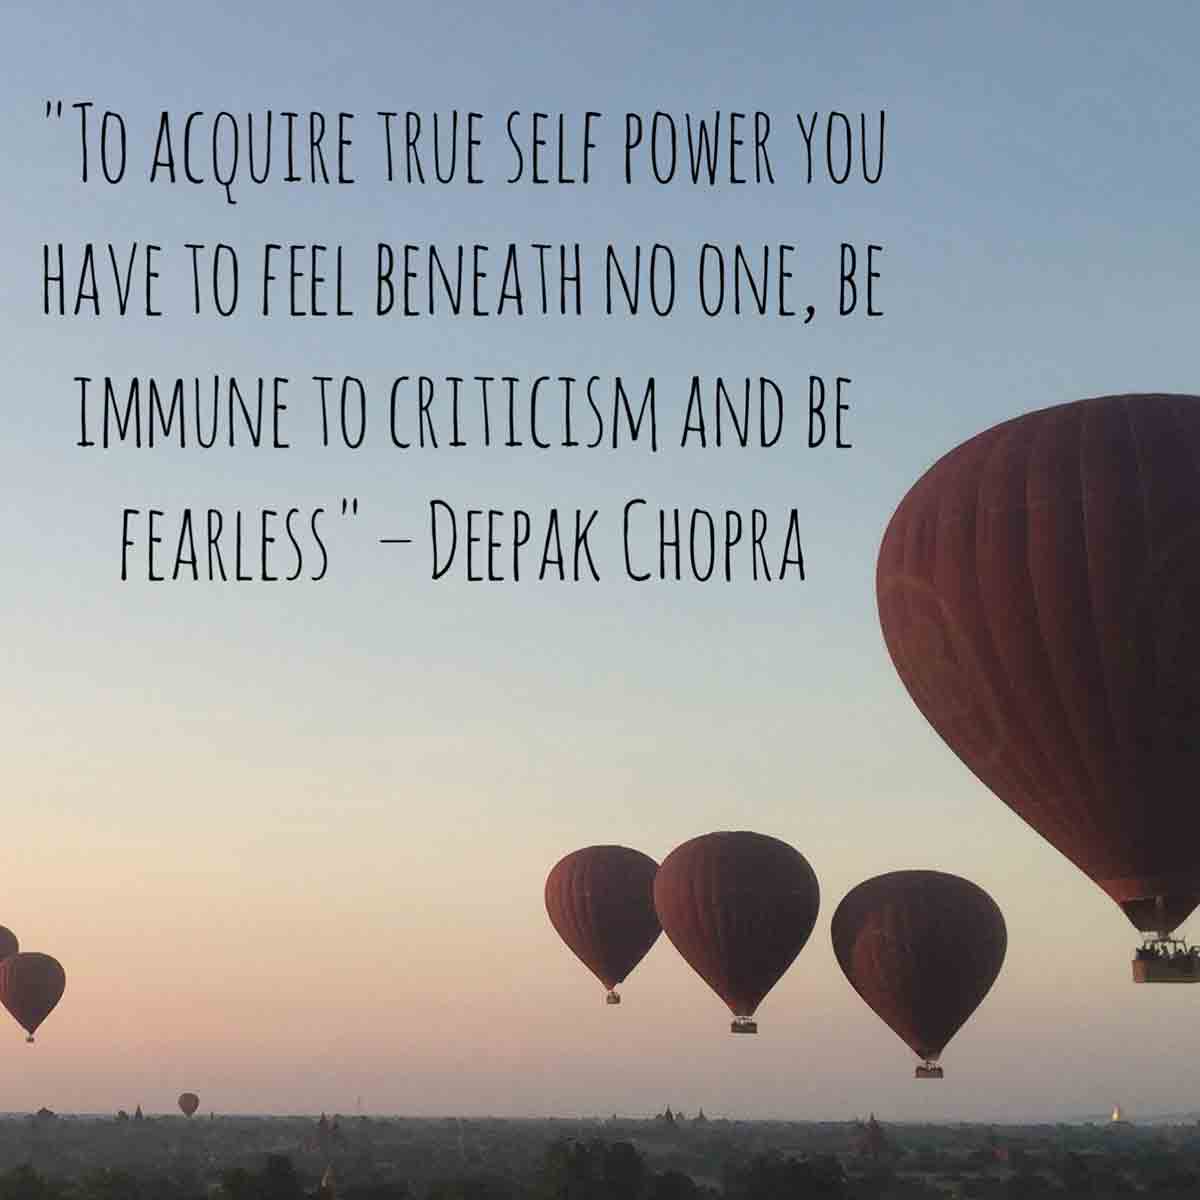 to acquire true self power you have to feel beneath no one, be immune to criticism and be fearless